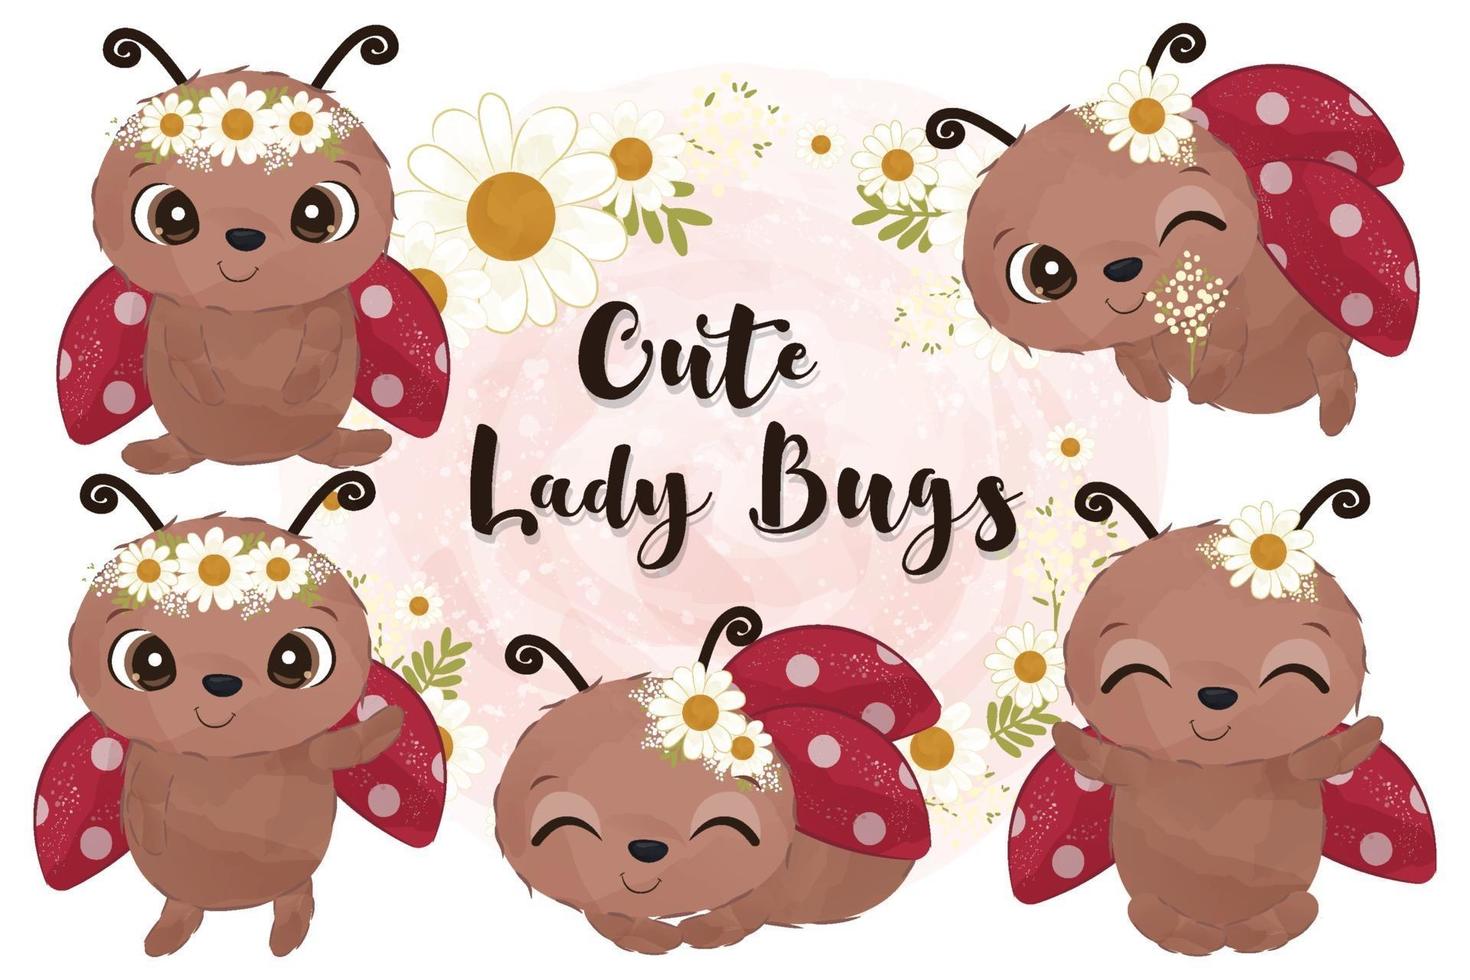 Cute little ladybugs collection in watercolor vector